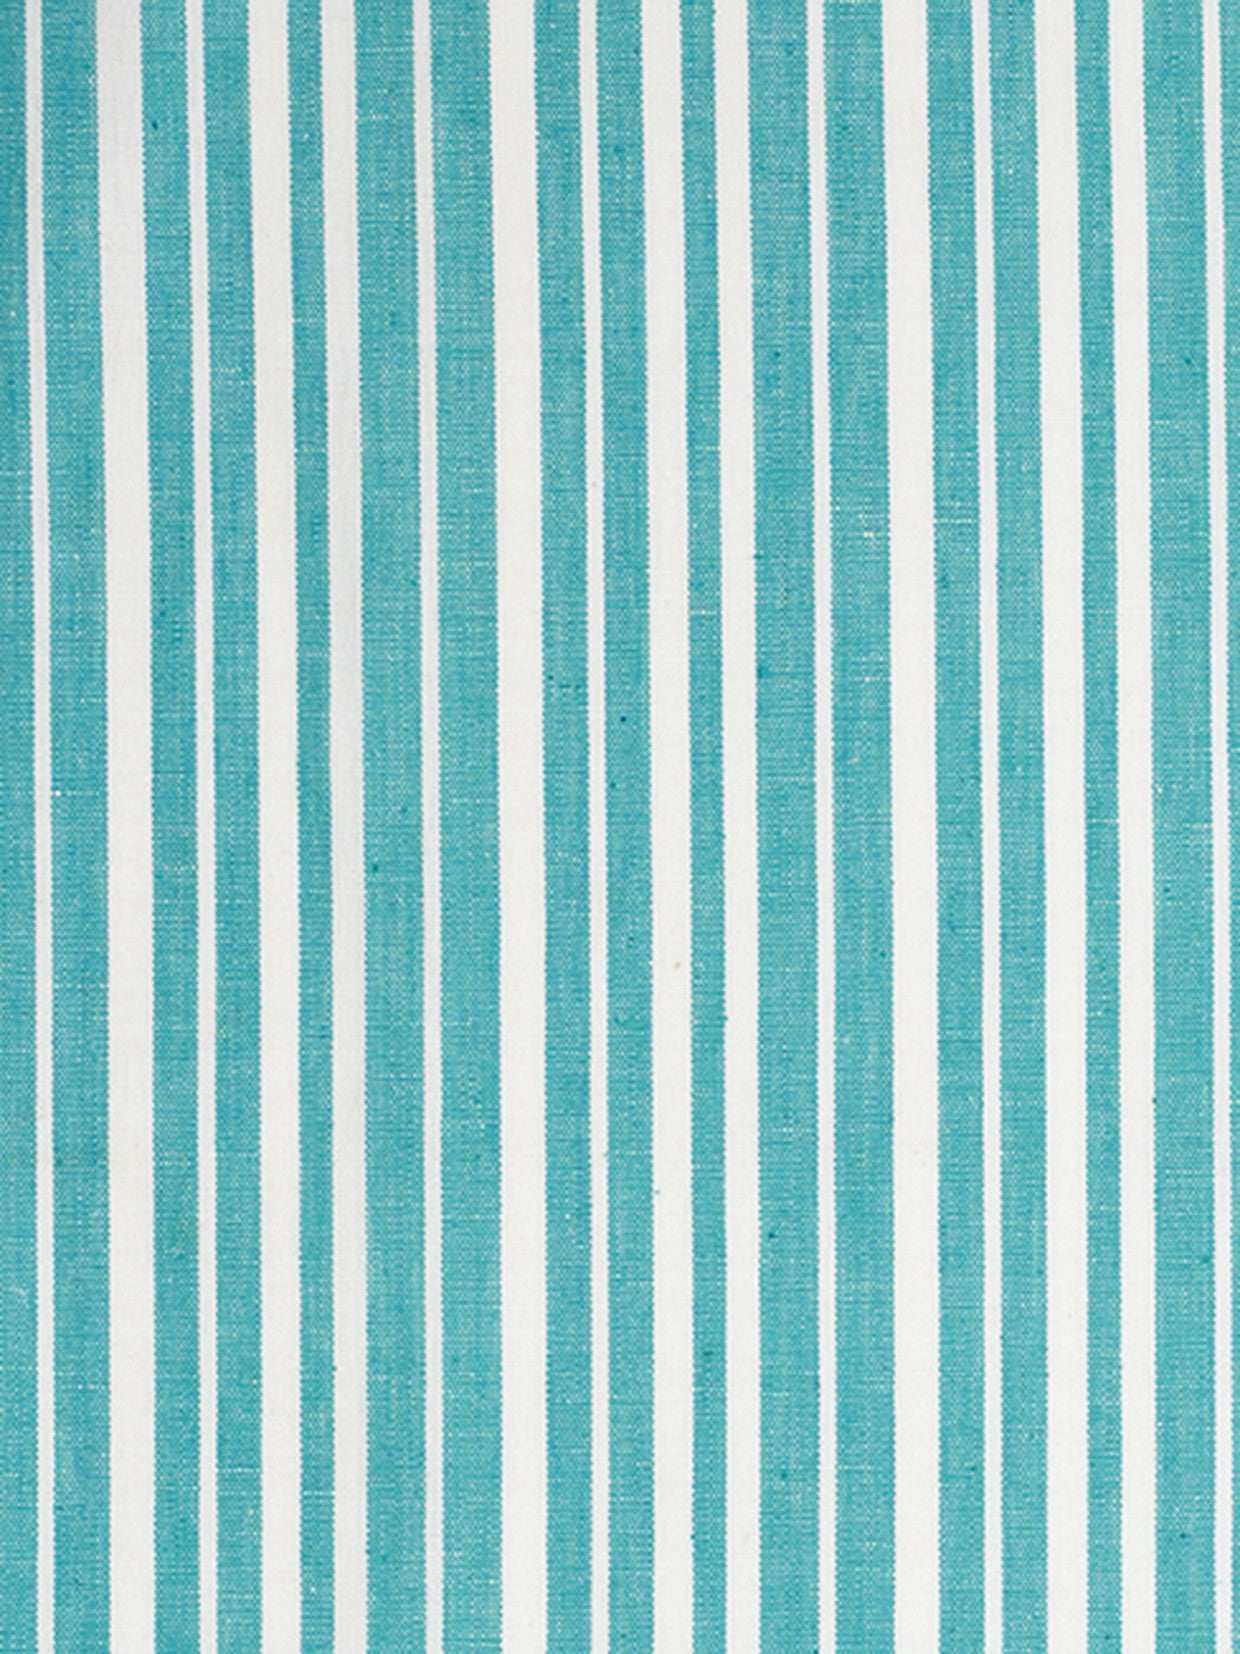 Palermo Ticking Stripe Home Decor Fabric in Pacific Turquoise Blue 